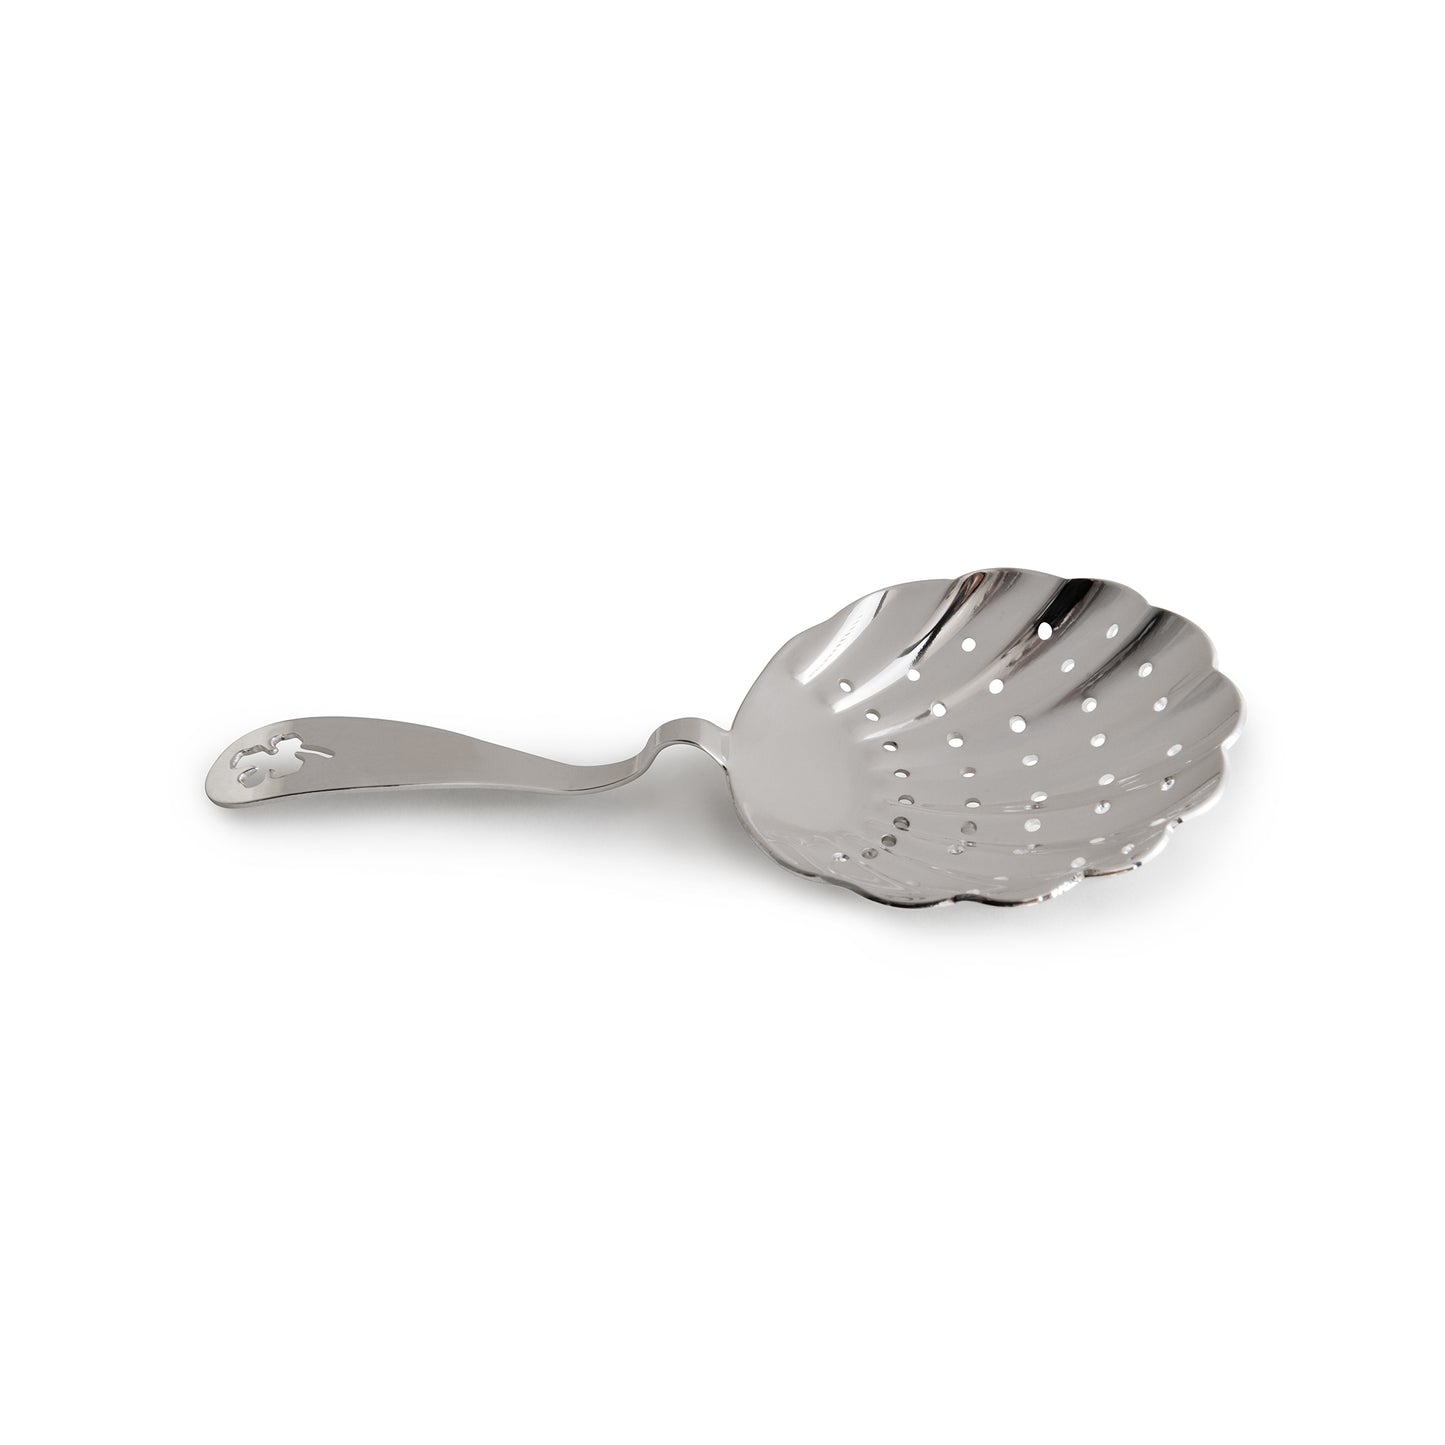 WILKINSON™ SCALLOPED JULEP STRAINER / SILVER-PLATED EPNS